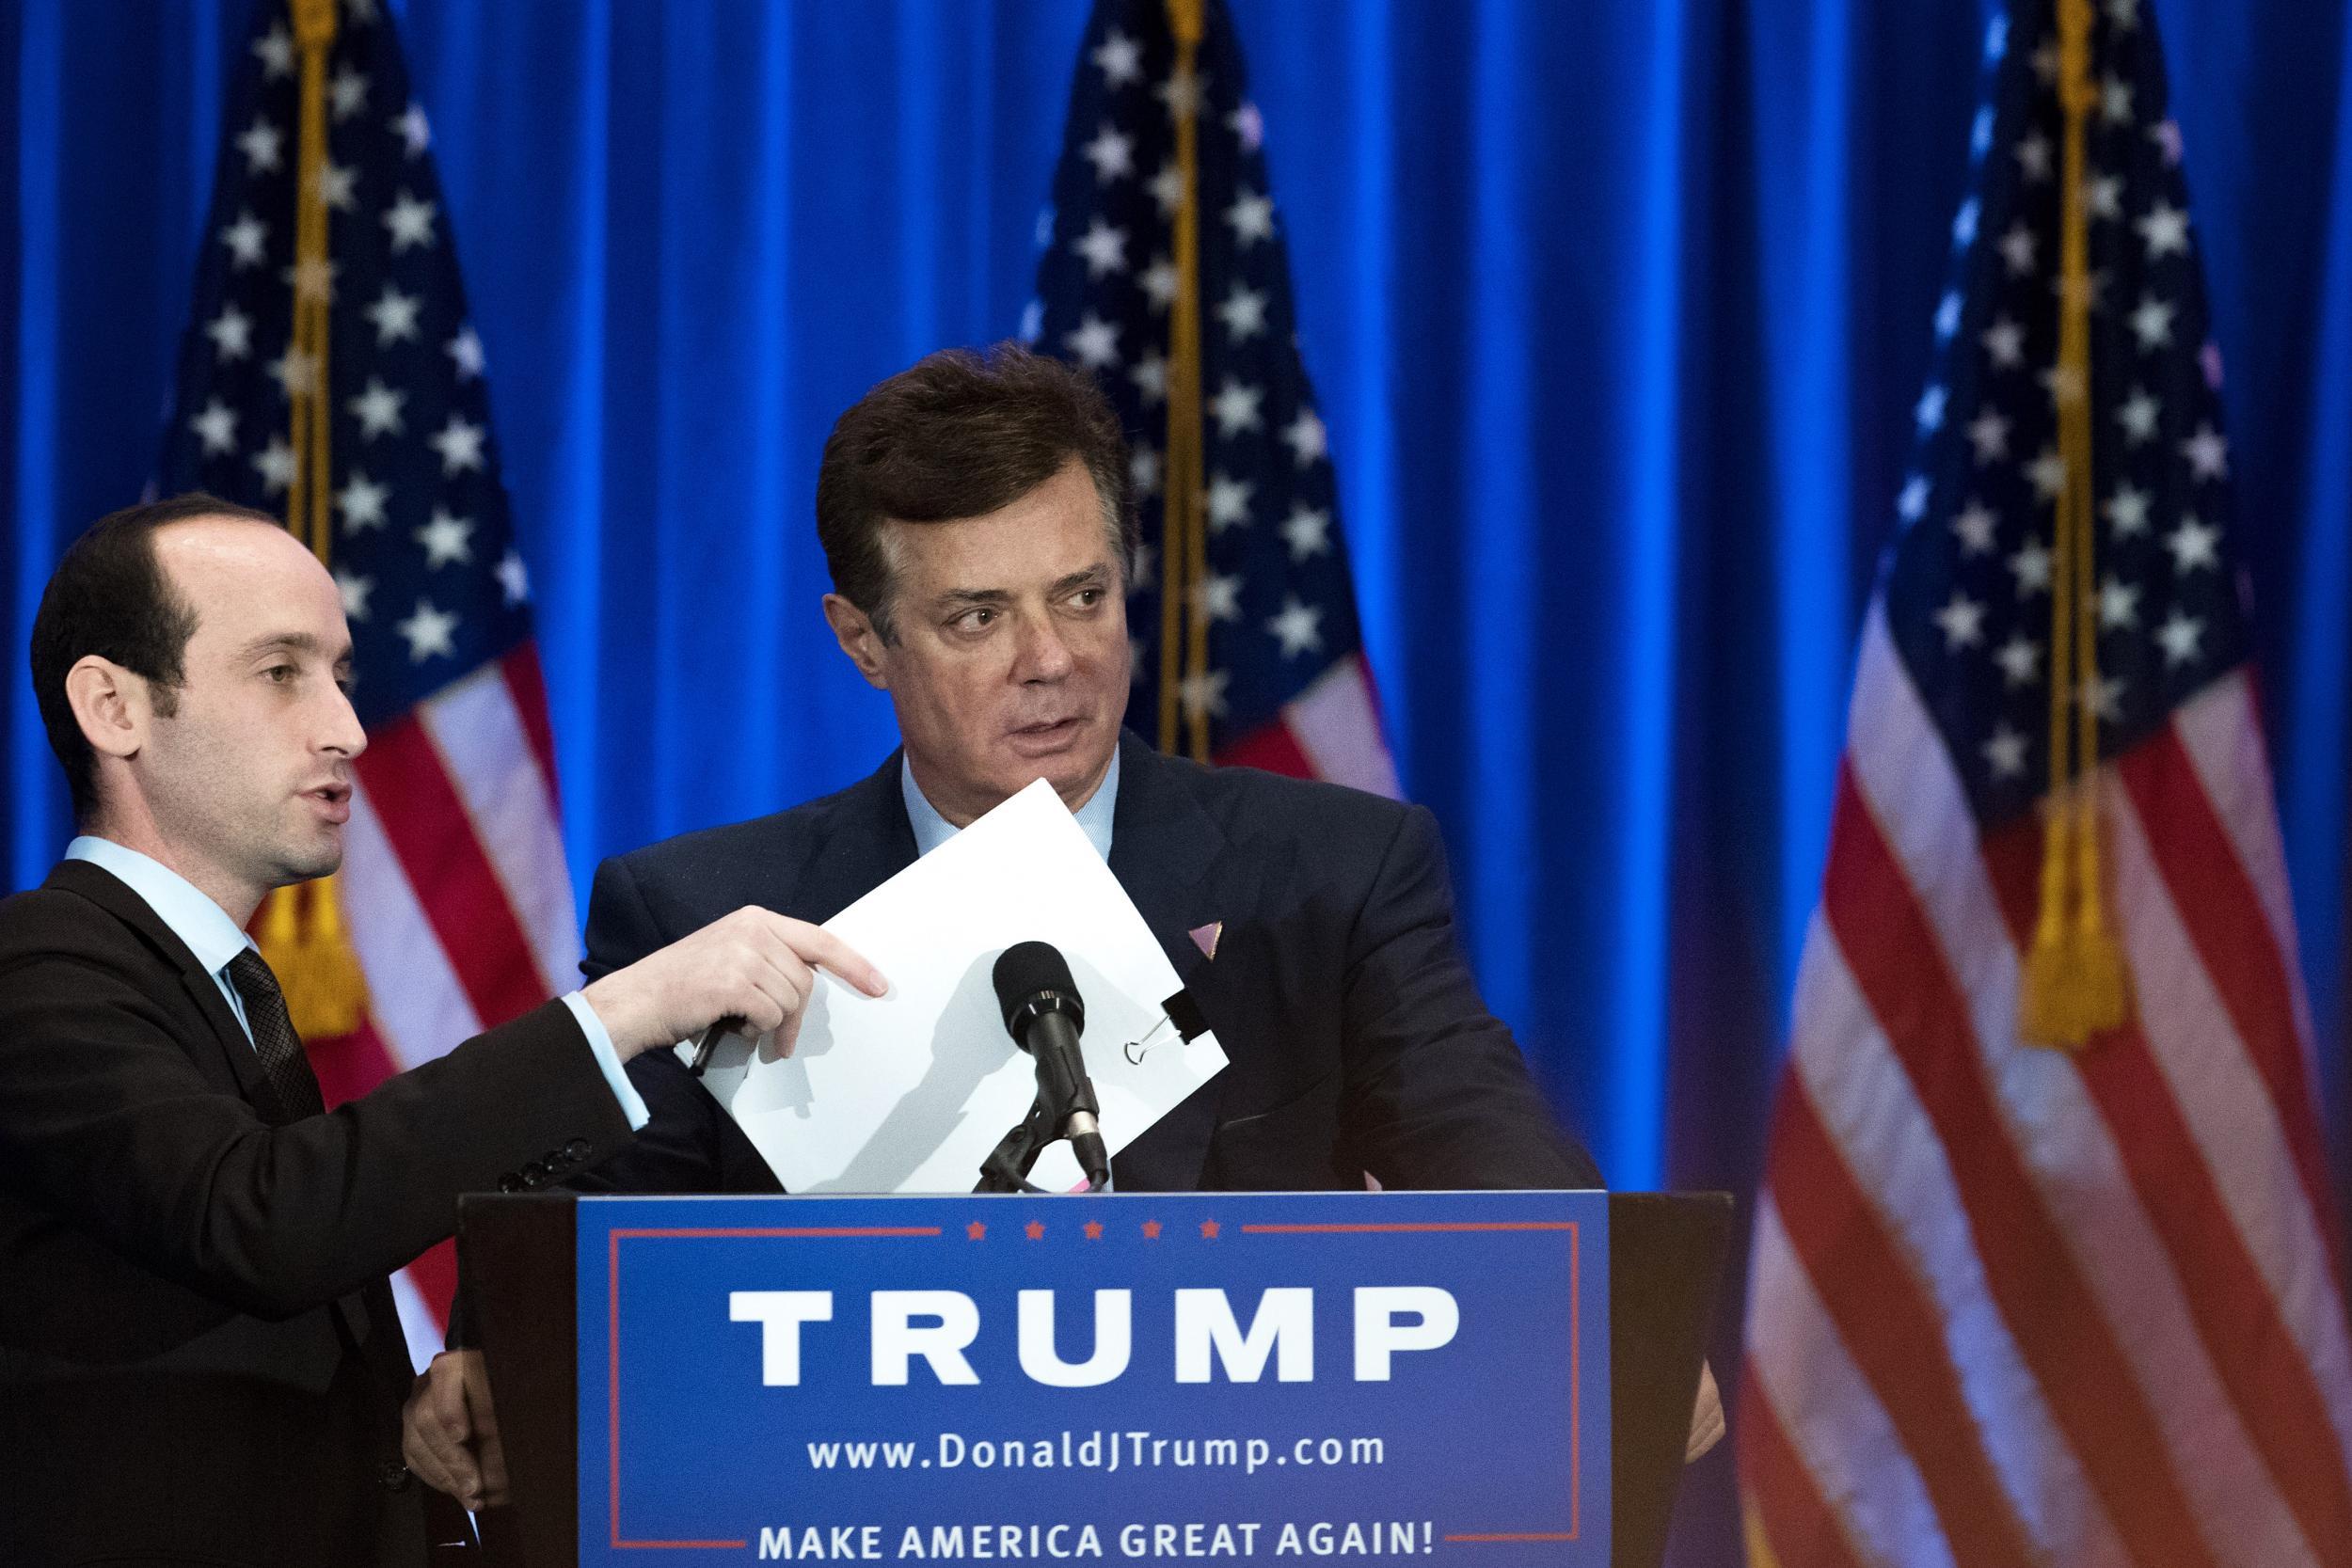 Paul Manafort previously managed Donald Trump's presidential campaign